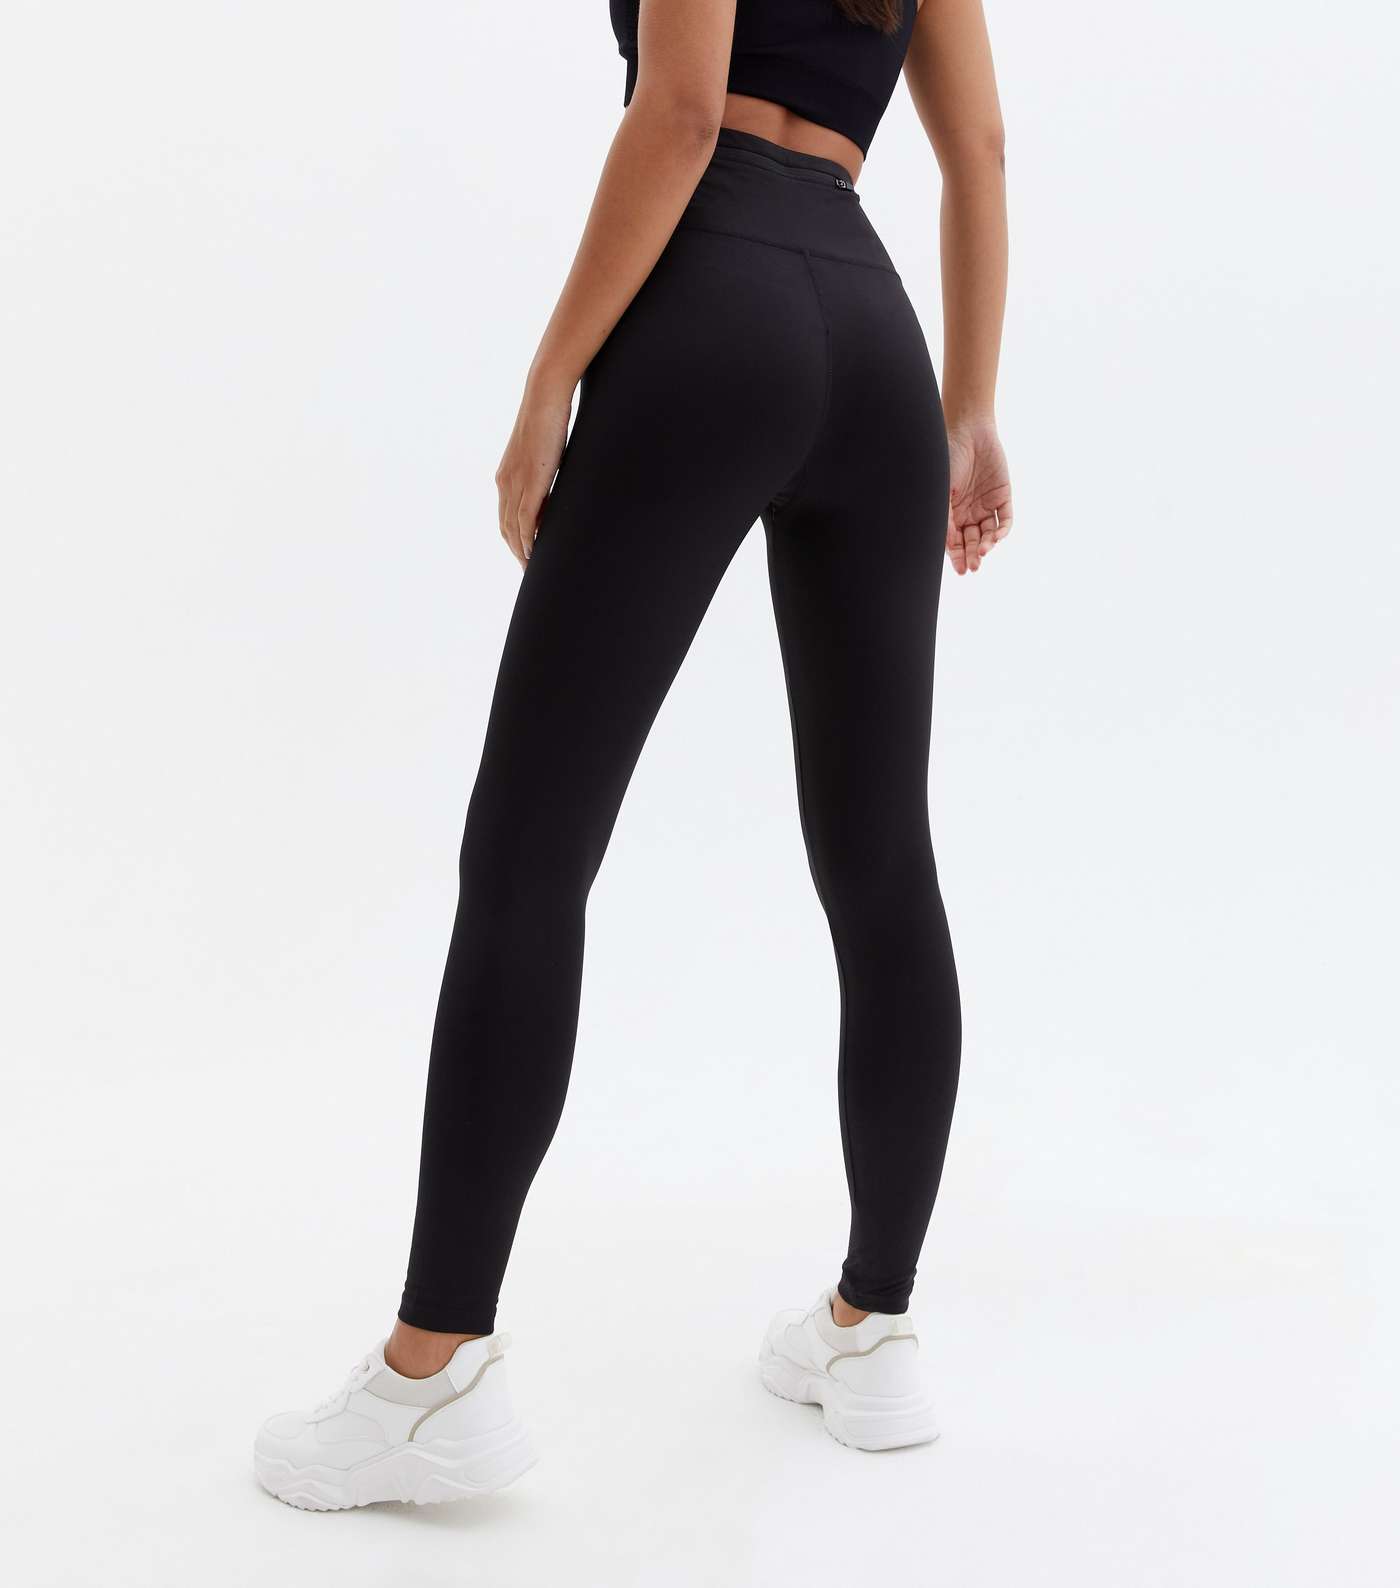 2 Pack Black and Grey Jersey High Waist Leggings Image 4